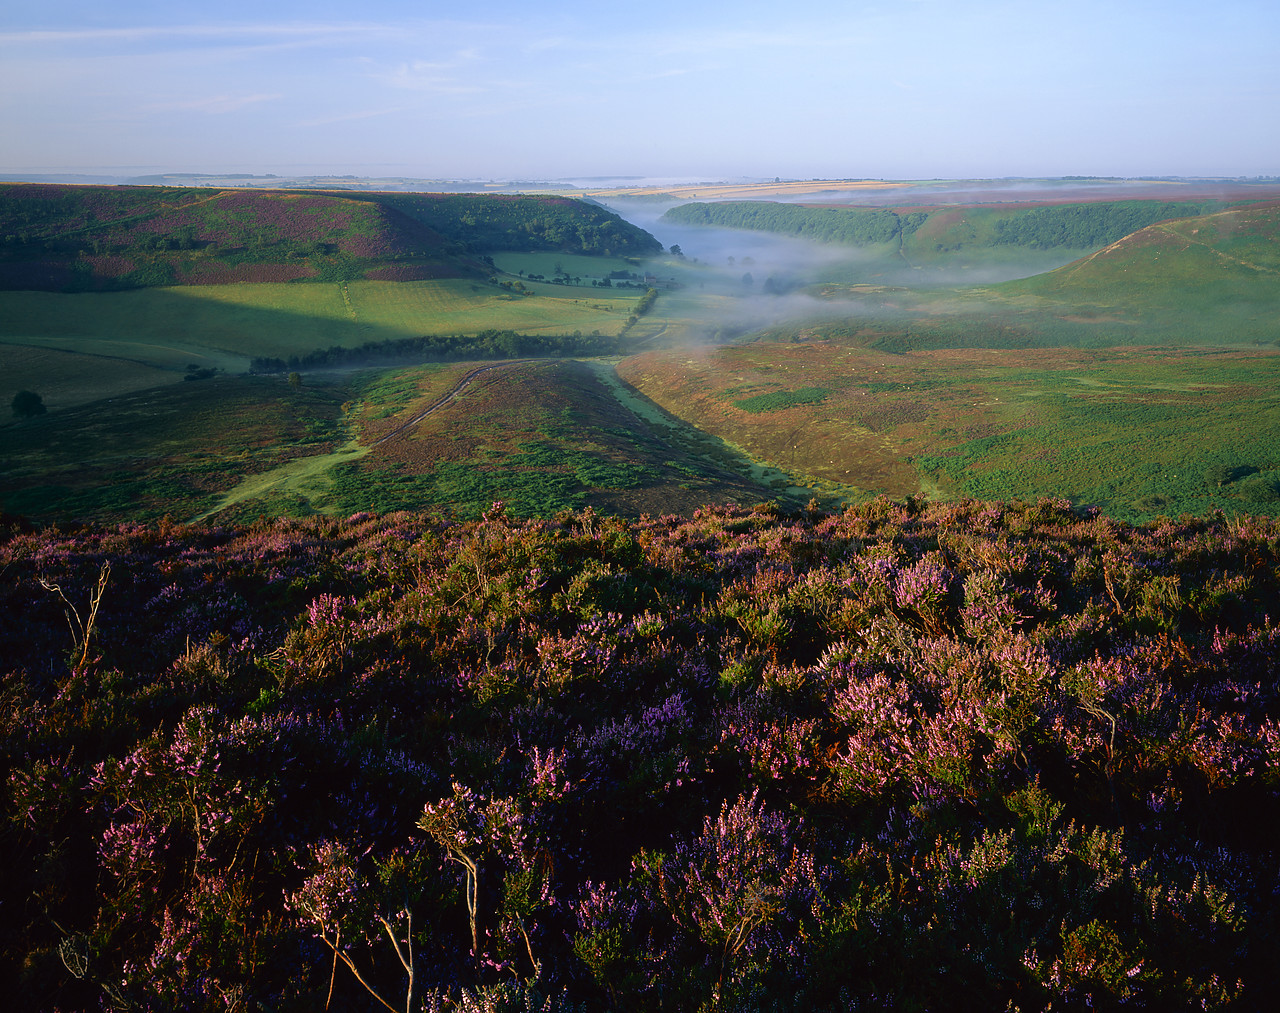 #980974-2 - Mist in Hole of Horcum, North York Moors, North Yorkshire, England